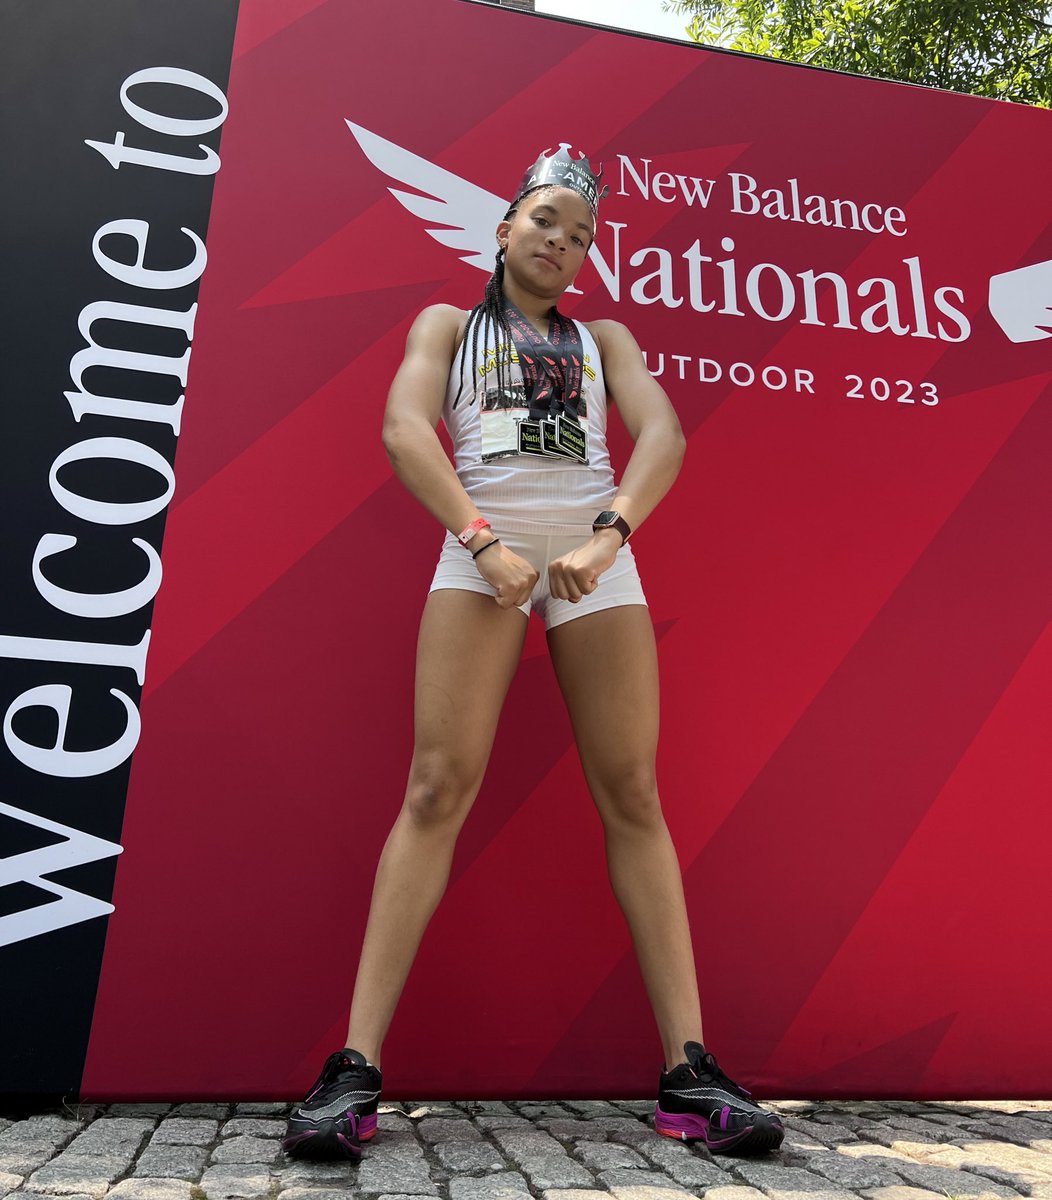 With completion of the weekend Kamryn Tatum finished 3rd in the 100m with a time of 11.82, 2nd in the 200m with a time of 23.93 AND SHE IS THE FRESHMAN NEW BALANCE NATIONAL CHAMP IN THE 400m with a time of 55.28 Congratulations to my little sister, All-American‼️@tatum_kamryn